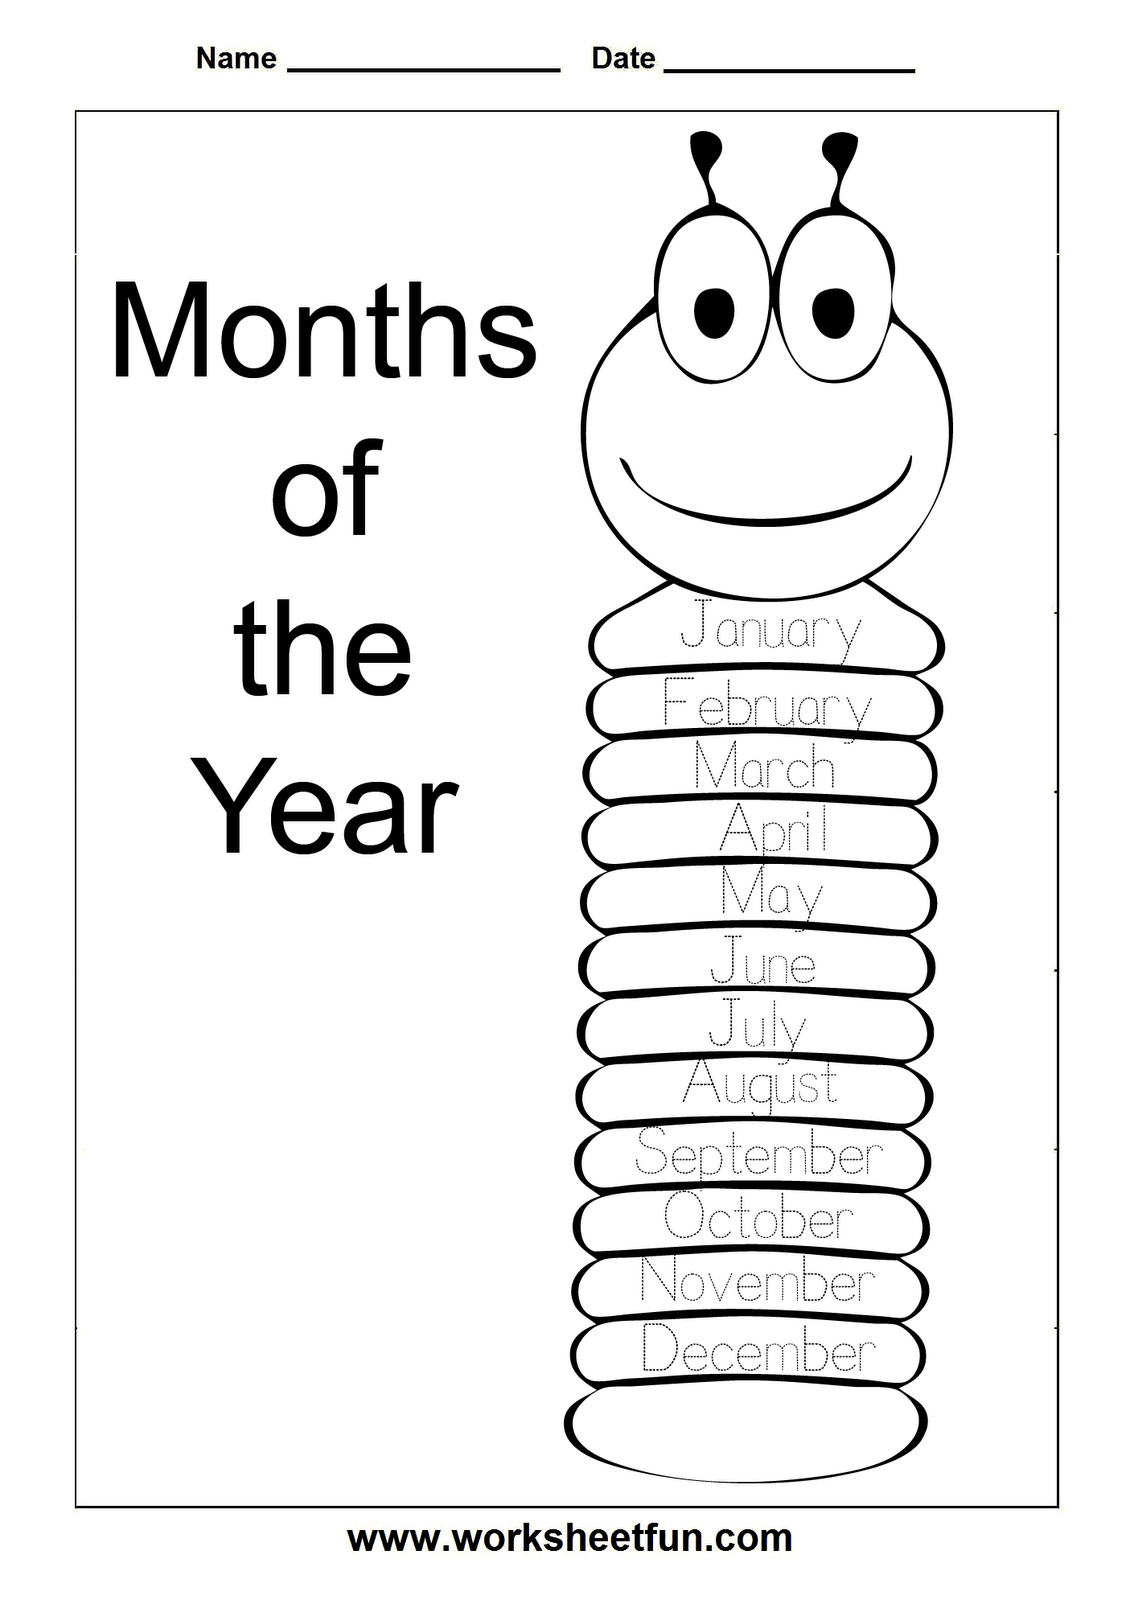 Image Result For How To Teach Months Of The Year | Kiddo | Learning - Free Printable Months Of The Year Chart